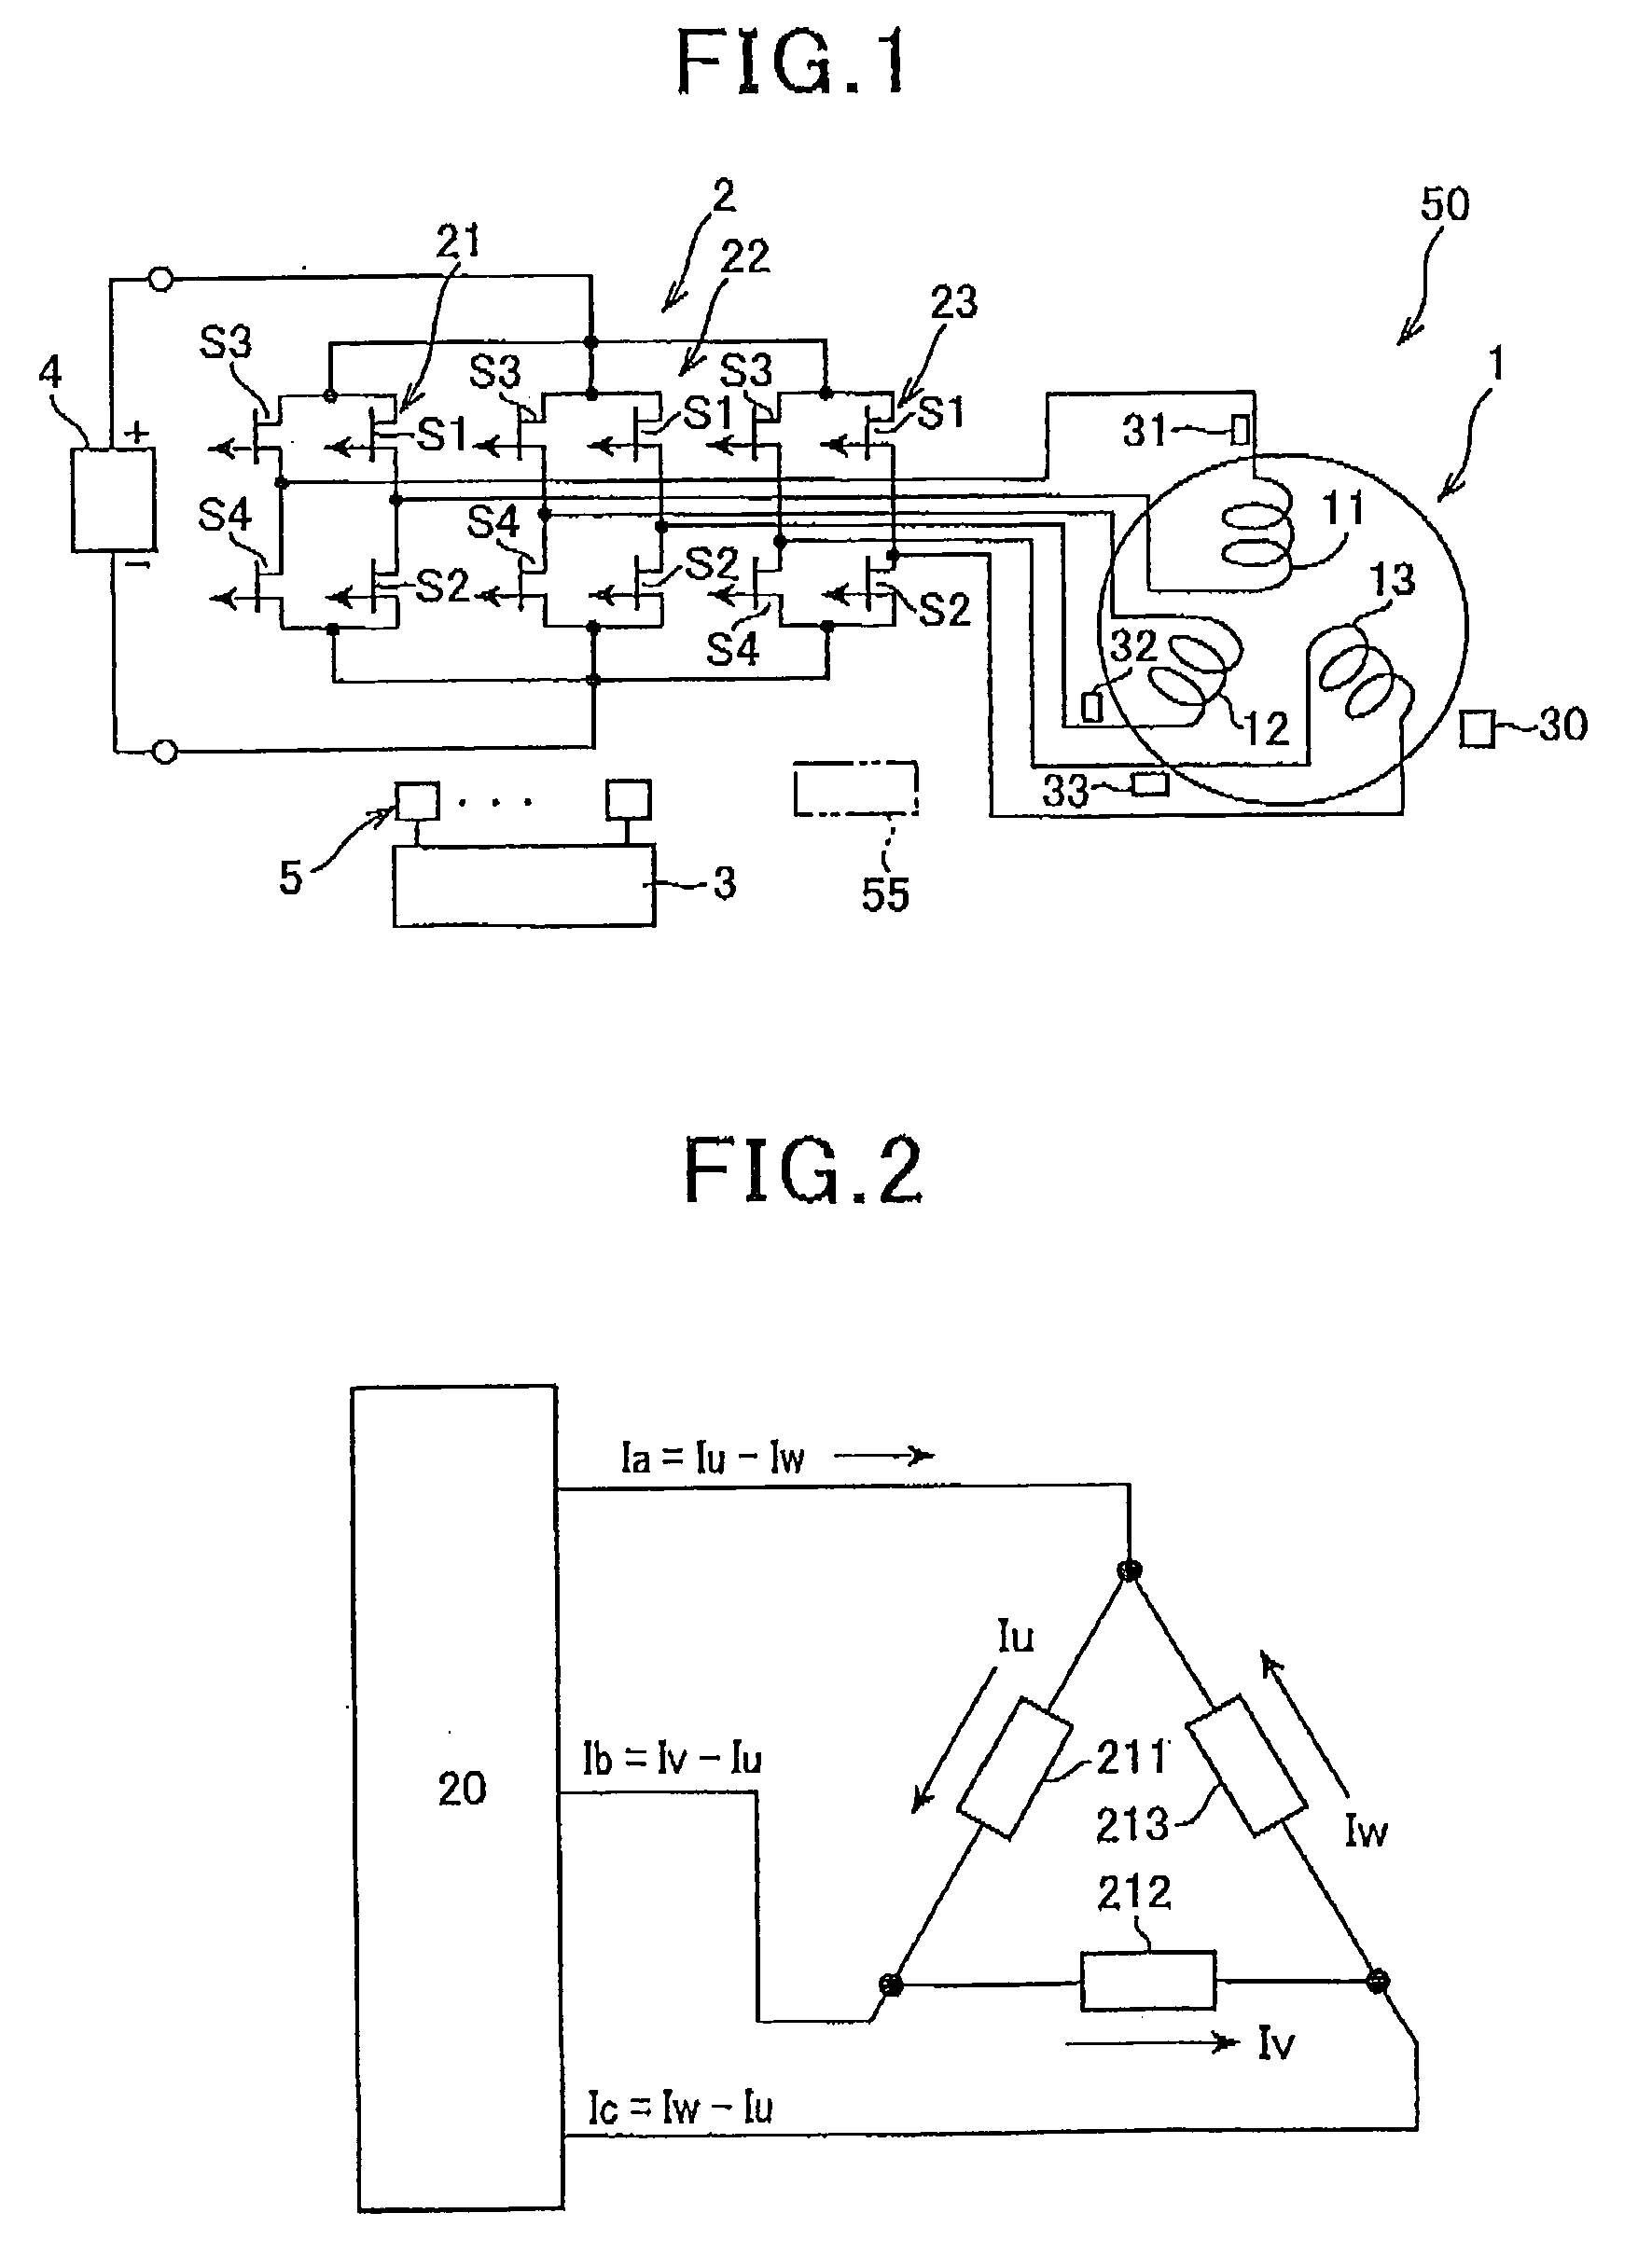 AC rotating machine with improved drive for its stator coil